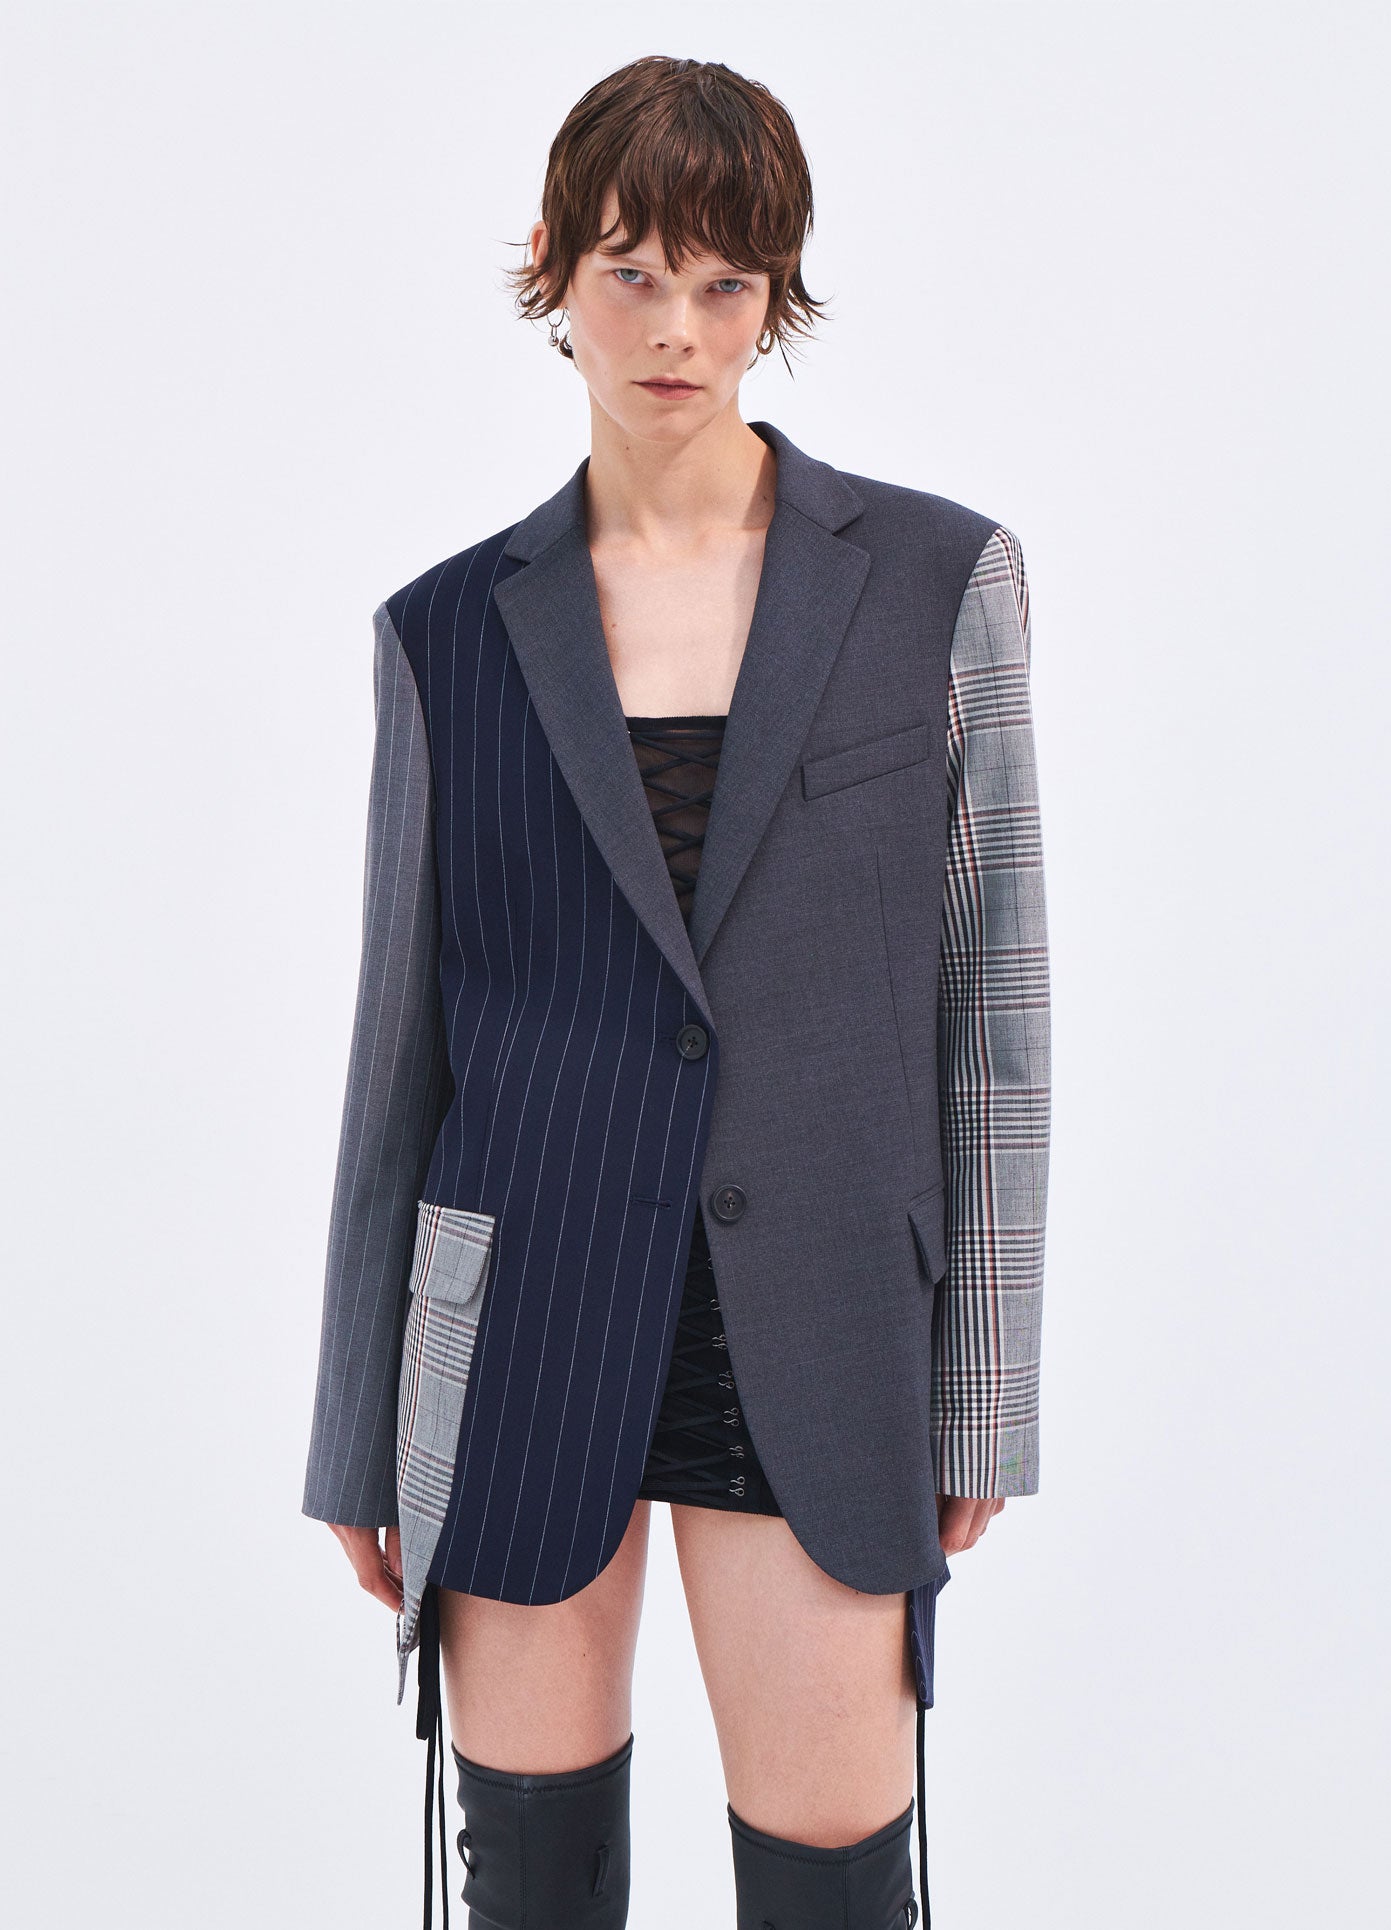 MONSE Spring 2024 Combo Boxy Tailored Jacket in Charcoal on model front view